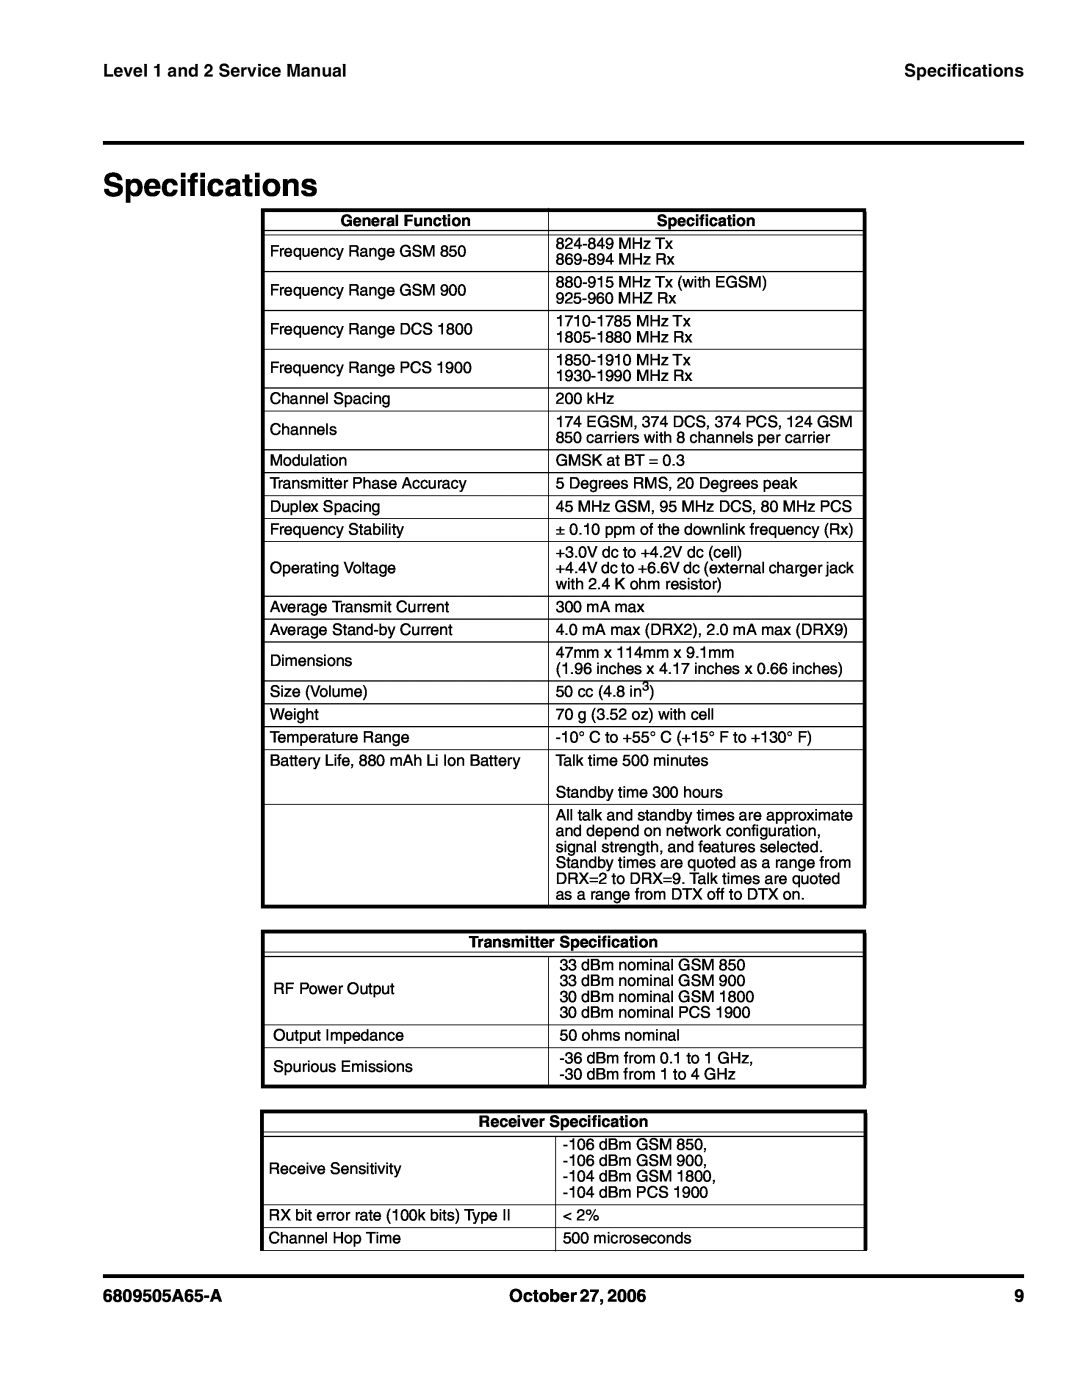 Motorola F3 service manual Specifications, Level 1 and 2 Service Manual, 6809505A65-A, October 27 